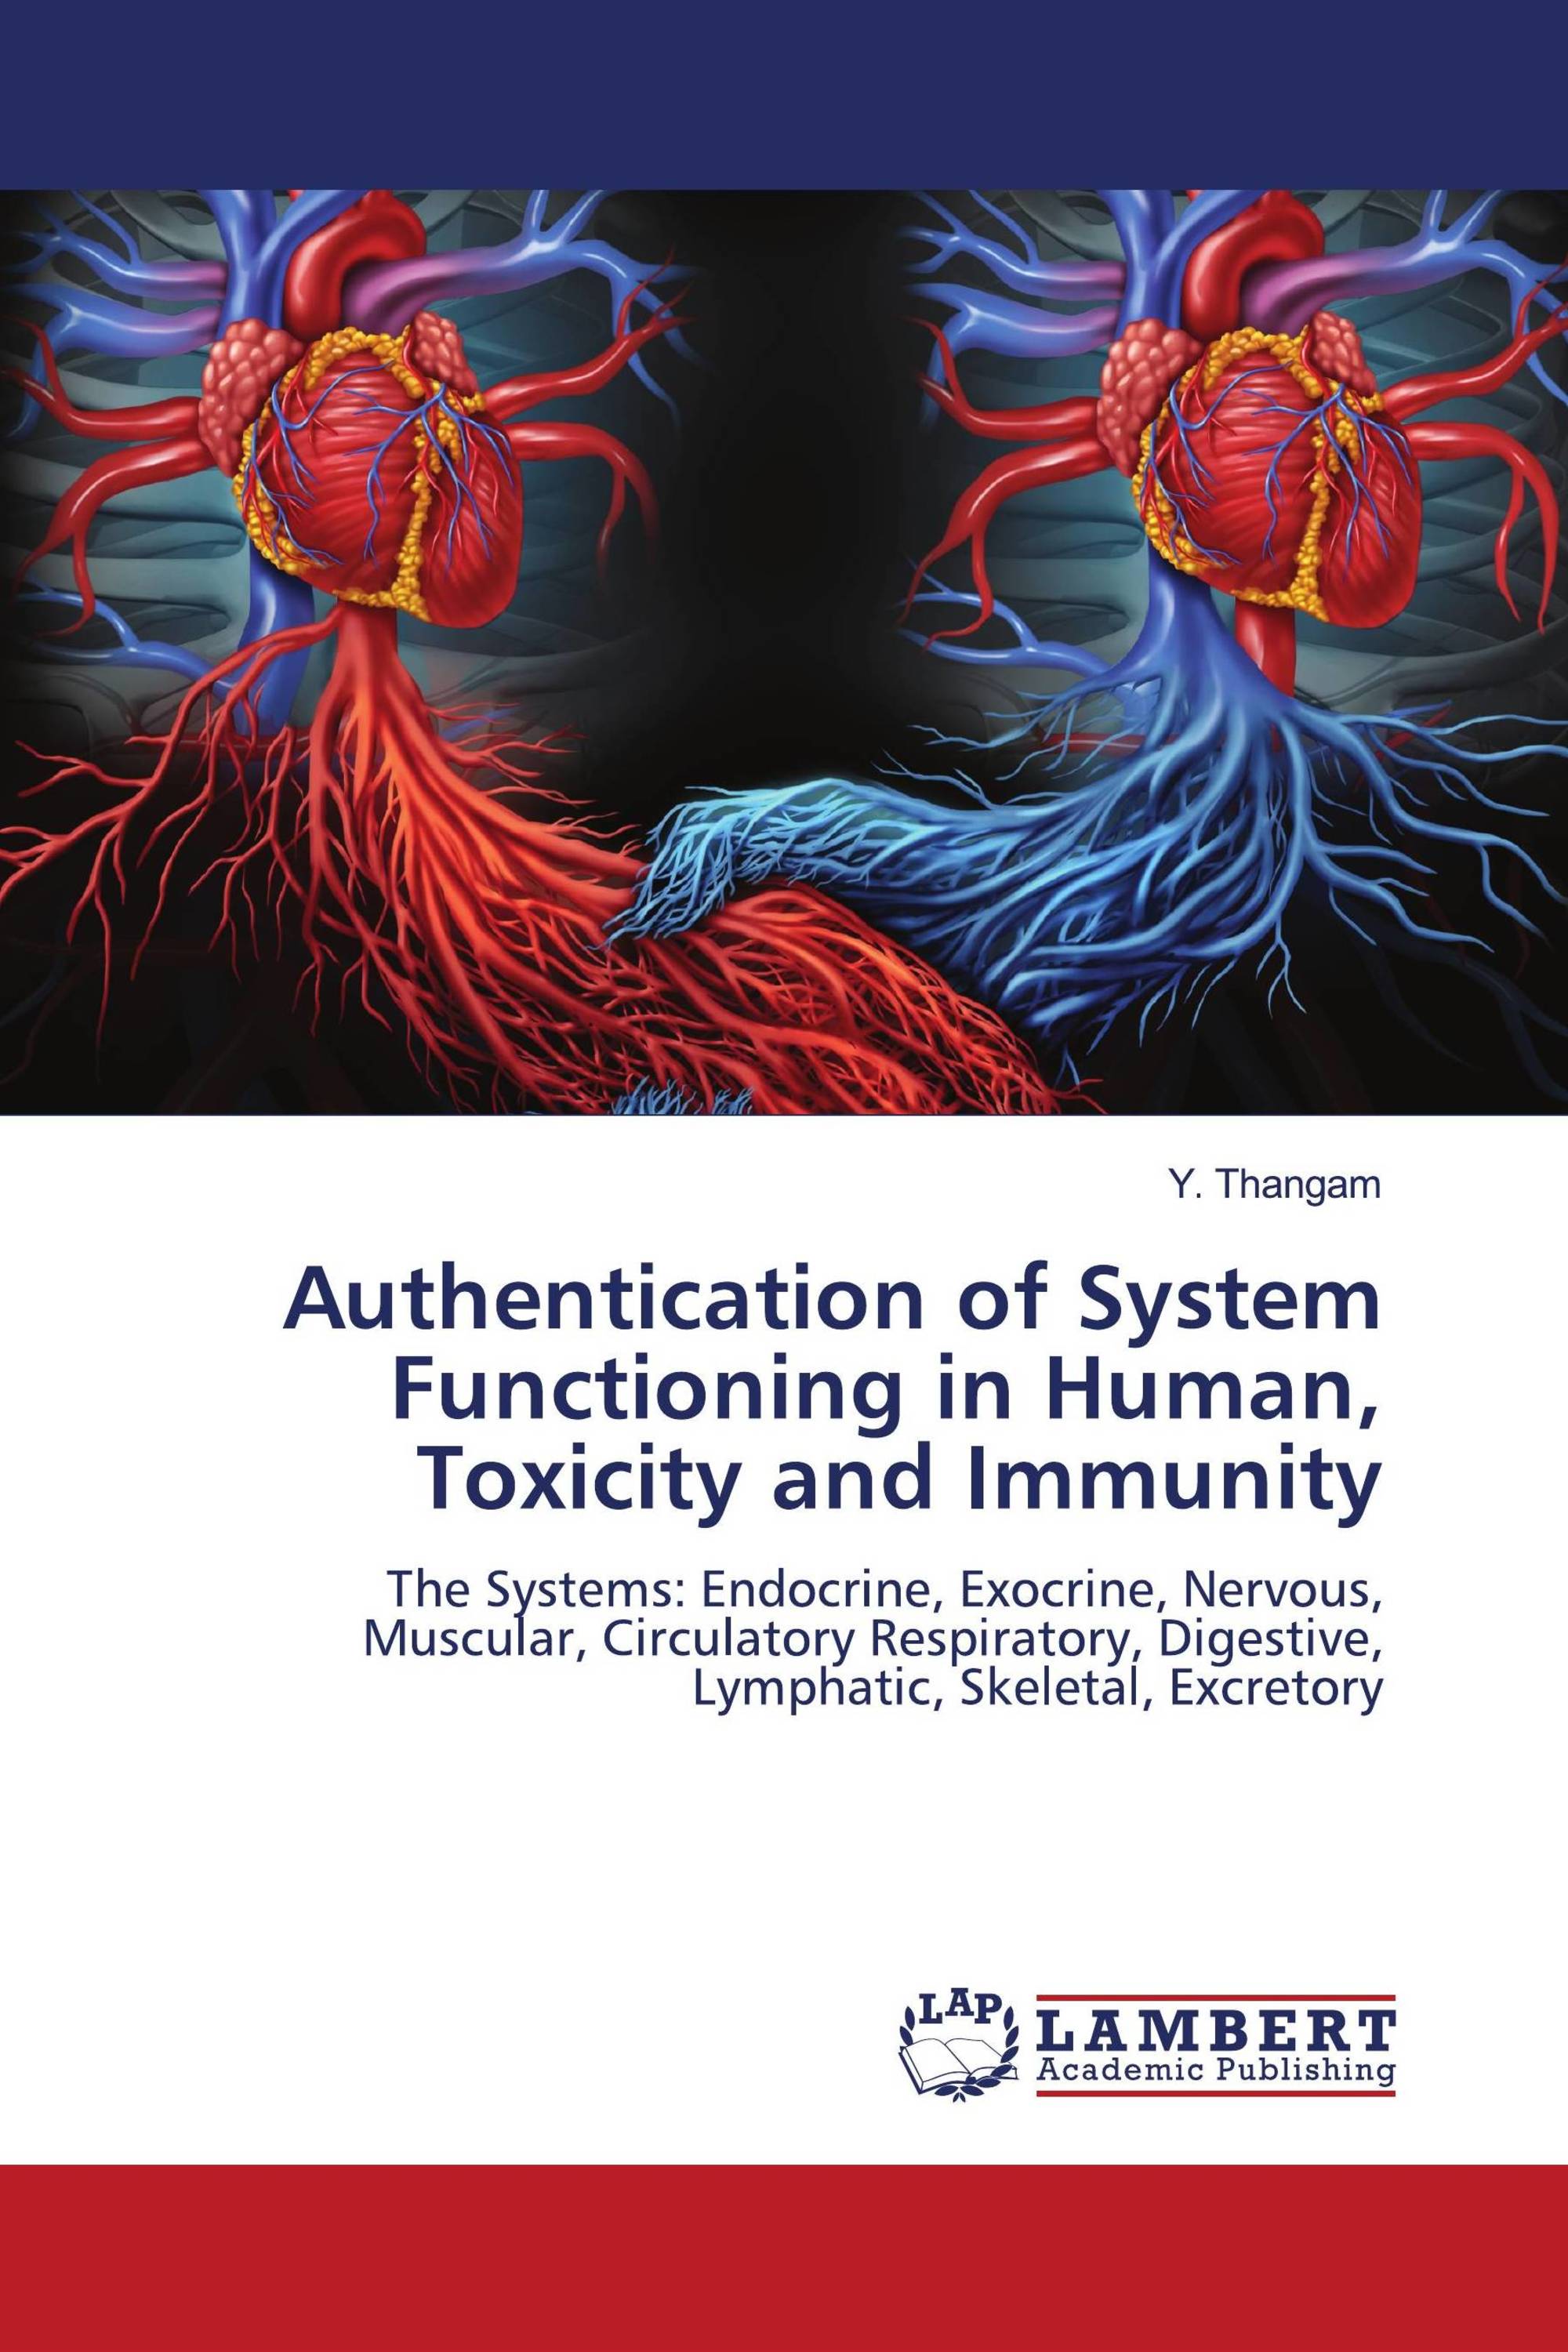 Authentication of System Functioning in Human, Toxicity and Immunity